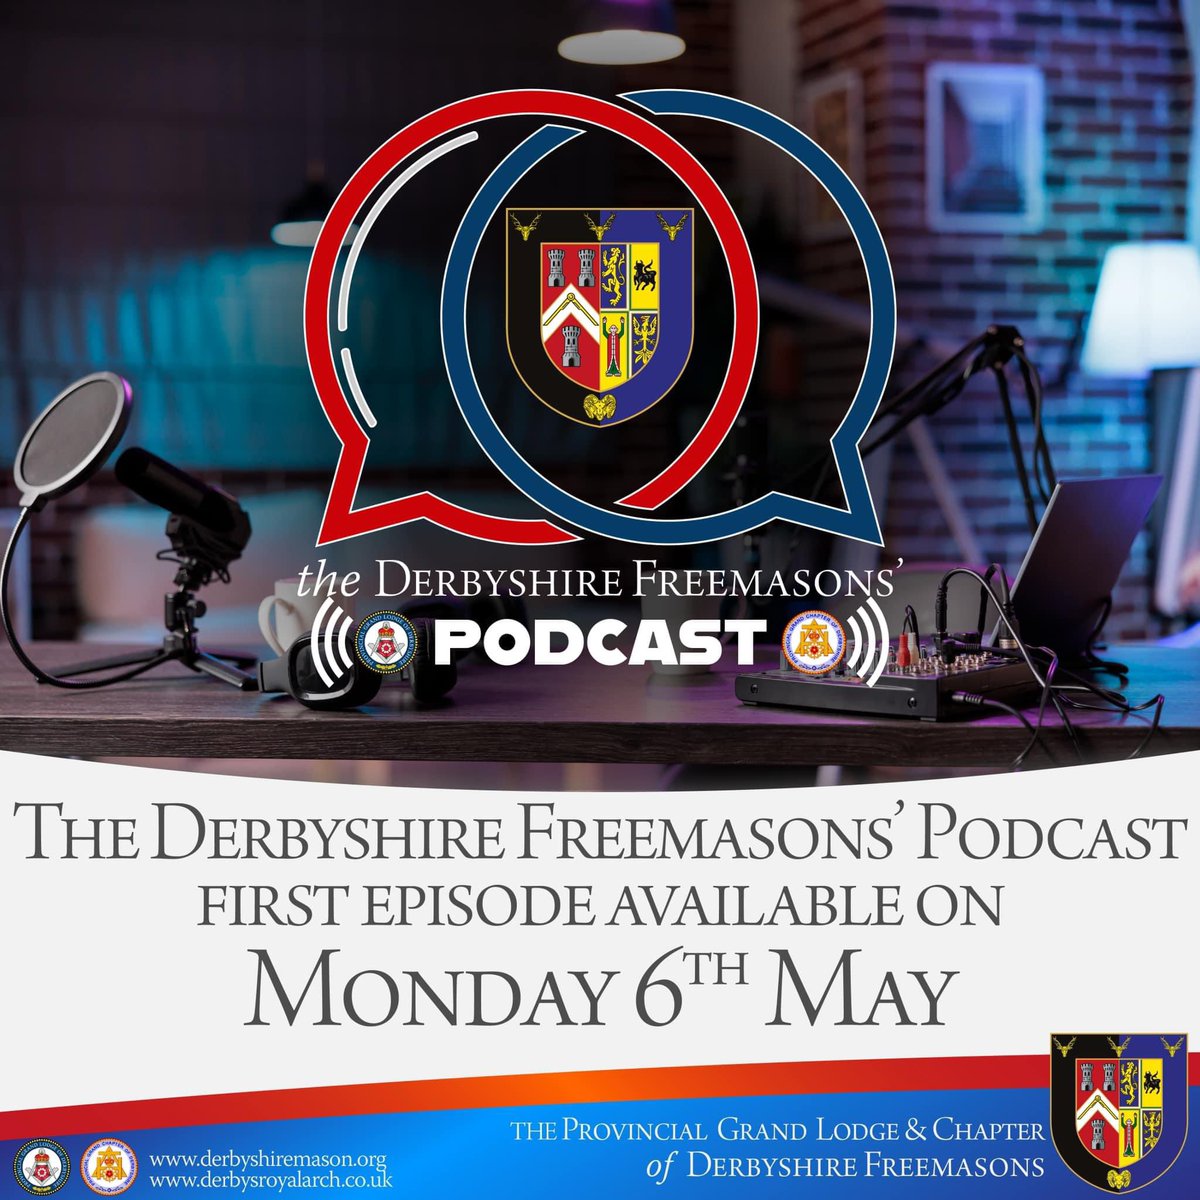 💥Excited to announce the 1st intro episode of The #Derbyshire #Freemasons’ #podcast will be available from Monday 6th May. Every 1st Monday of the month we’ll be meeting some of the colourful characters that make #Freemasonry in Derbyshire so special 🙌🎙️🎧📐 #Freemasons